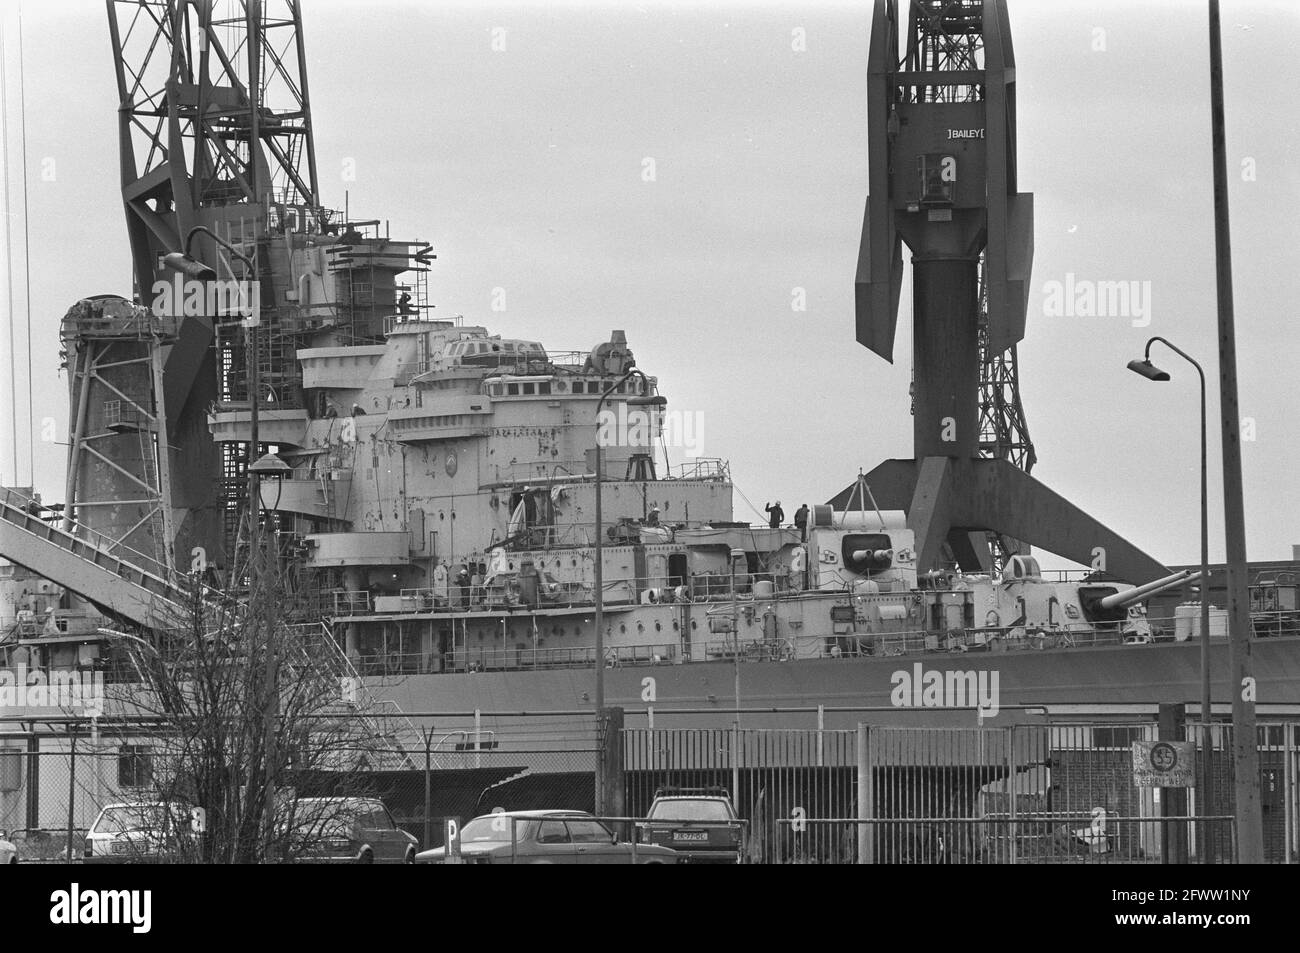 At former ADM yard in Amsterdam work is being done on cruiser Almirante Grau, for which Peru has a payment arrears of 16 million, April 1, 1986, cruisers, shipbuilding, The Netherlands, 20th century press agency photo, news to remember, documentary, historic photography 1945-1990, visual stories, human history of the Twentieth Century, capturing moments in time Stock Photo